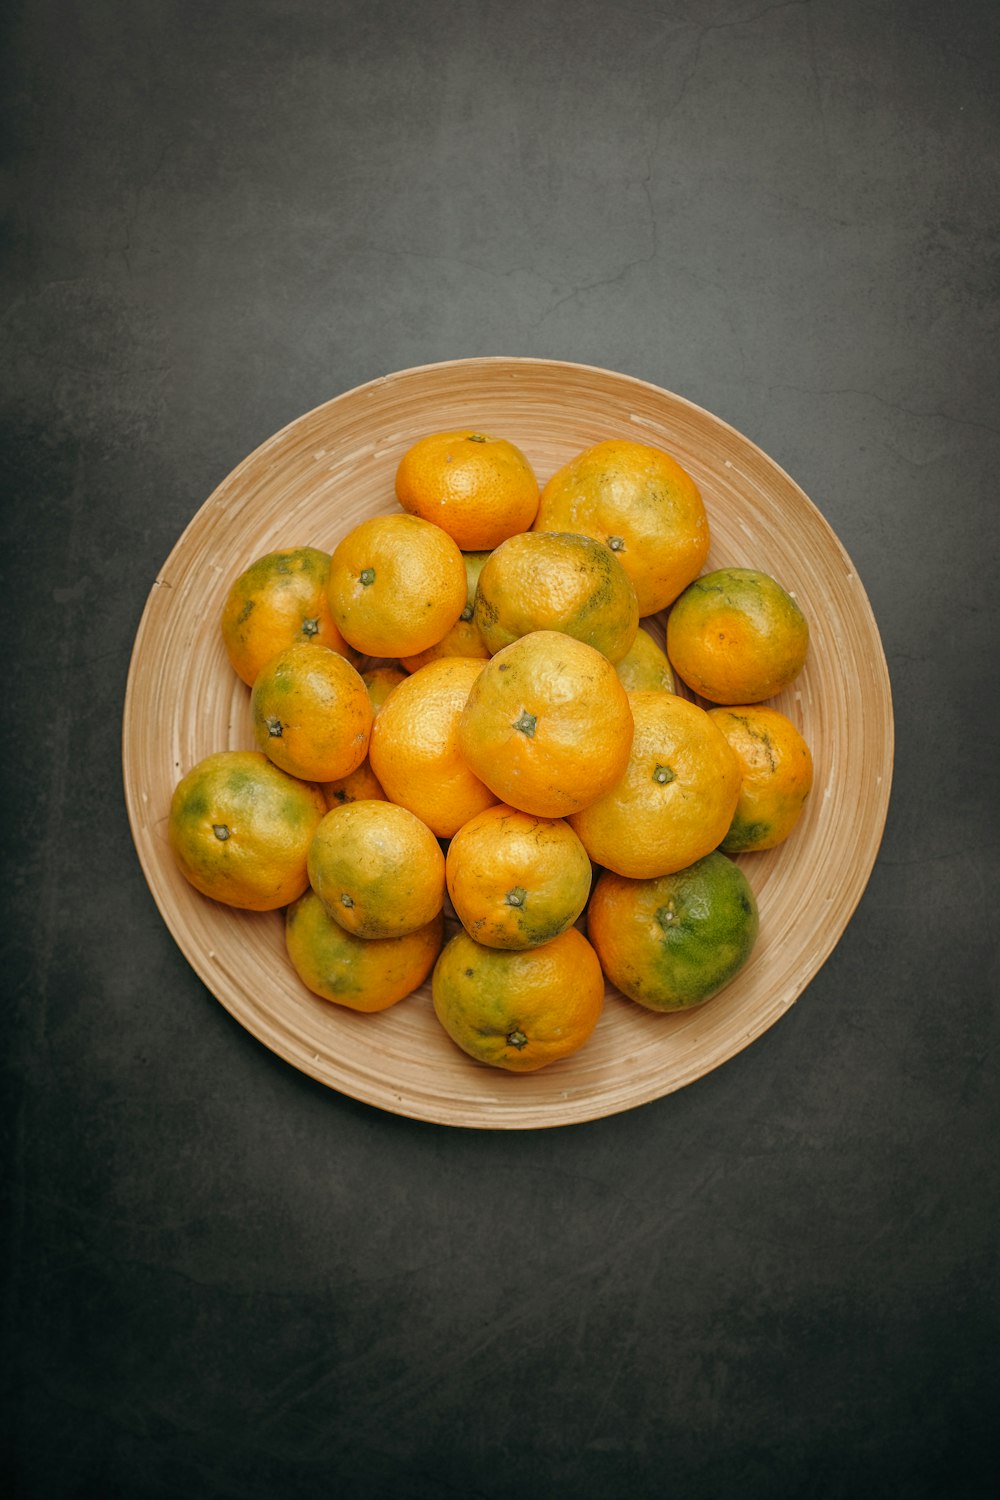 a bowl full of oranges and limes on a table